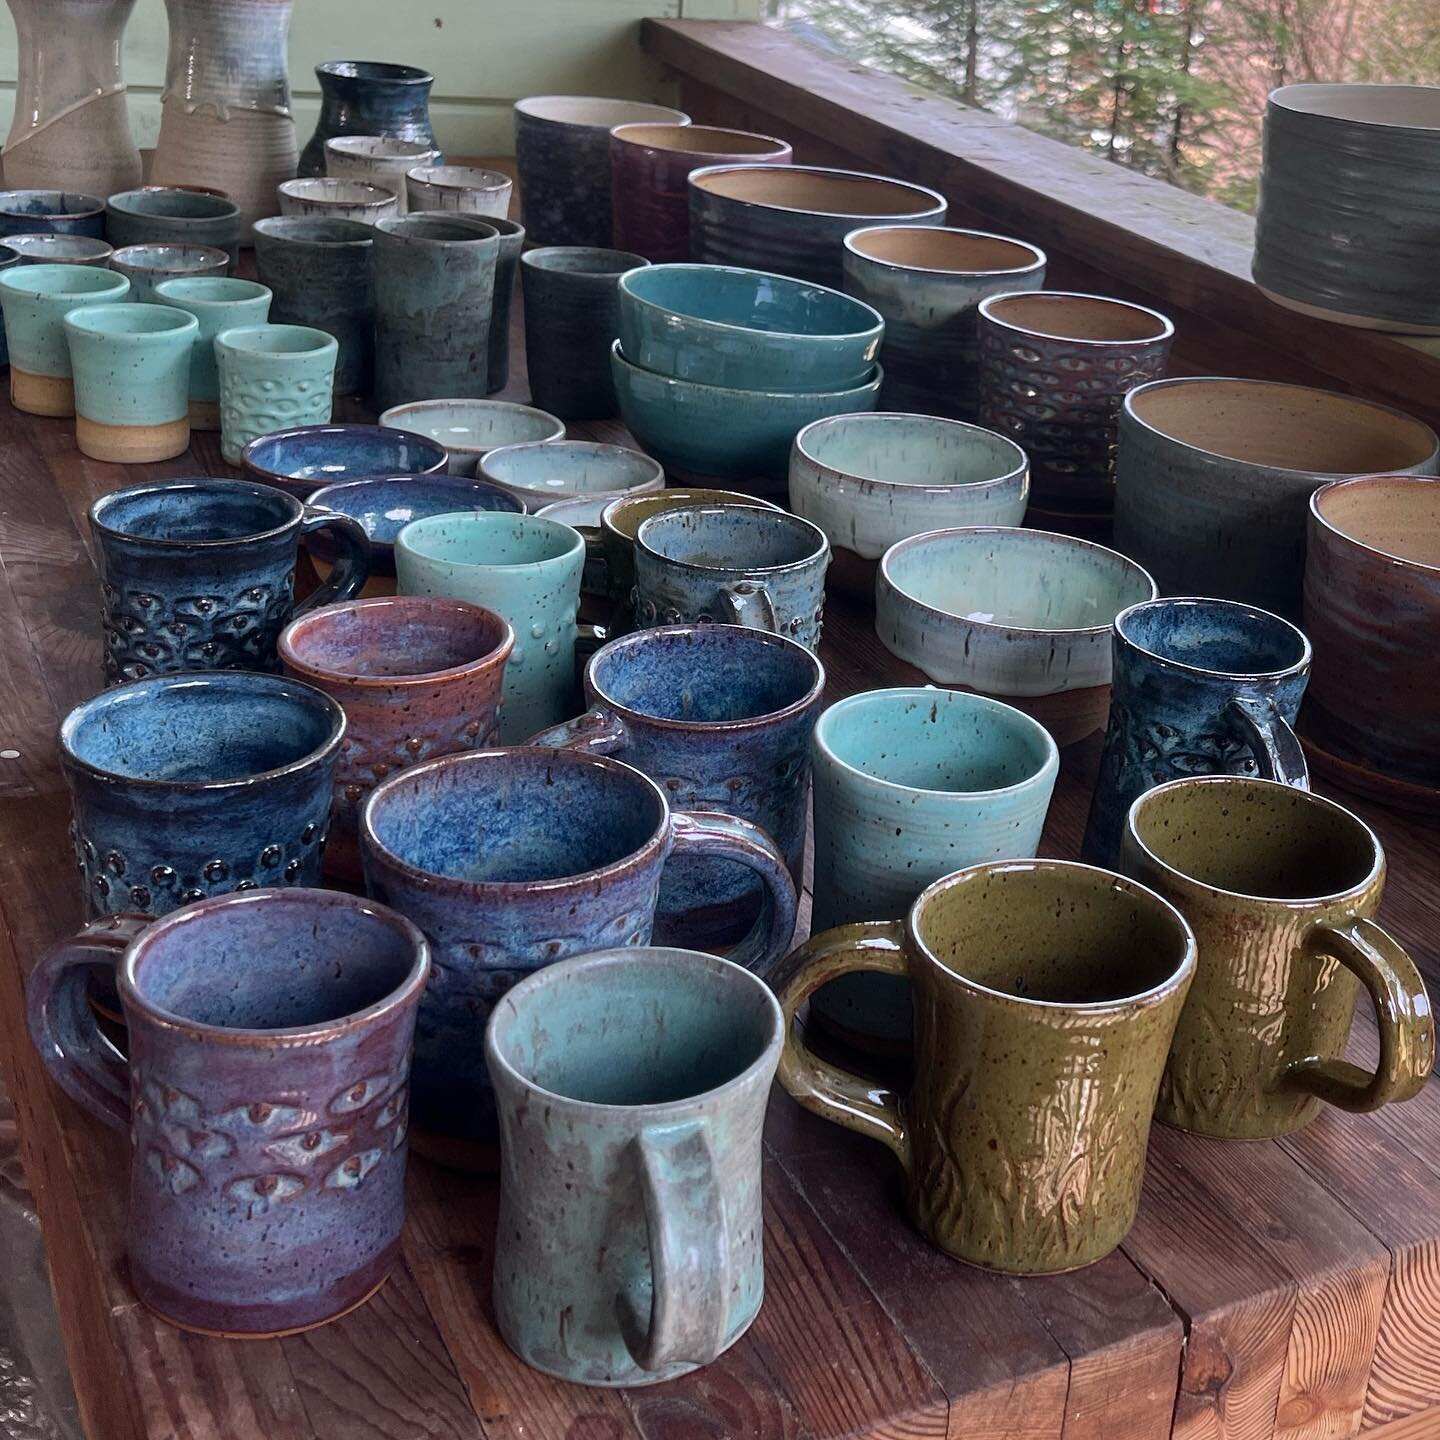 IT JUST KEEPS GETTING BETTER!⁣
⁣
New pottery from @aeronautdesigns, just in time for Friday&rsquo;s @ketchikan_arts_council Art Walk! ⁣
⁣
And all three shops will be open! ⁣
@niblicksgeneralstore 
@old.ache.alaska 
@ketchikandrygoods